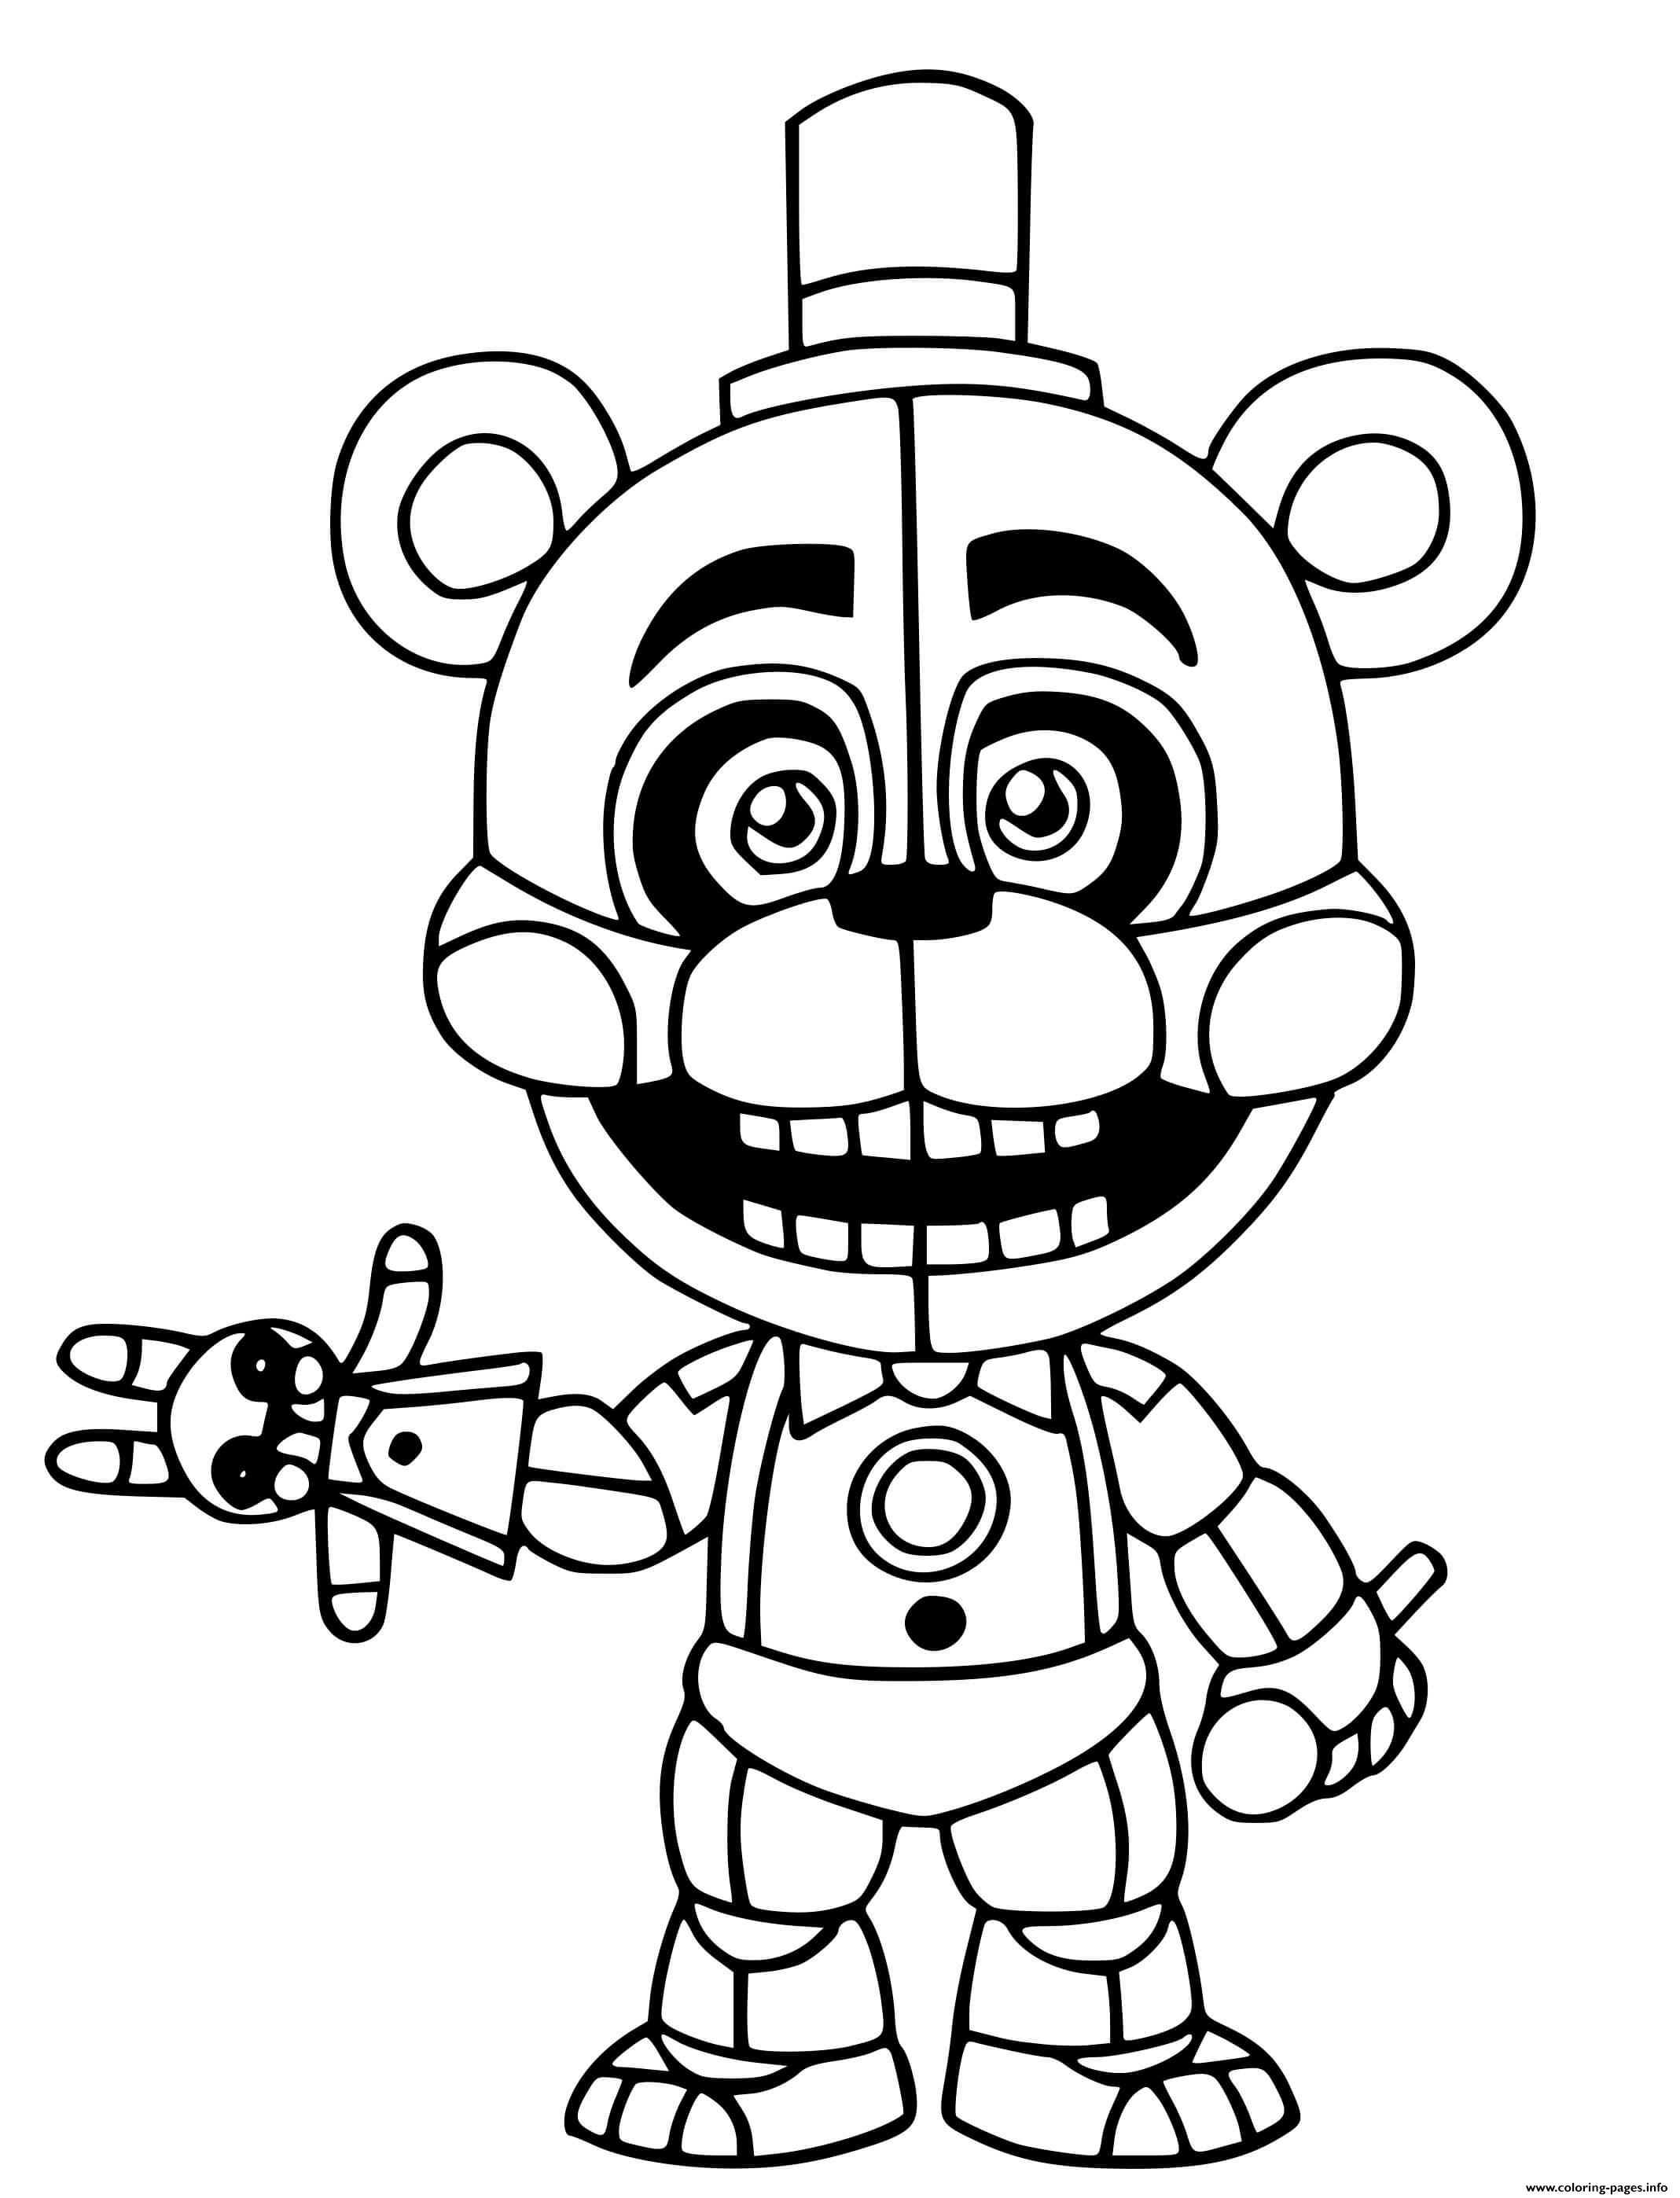 freddy-2-coloring-page-printable